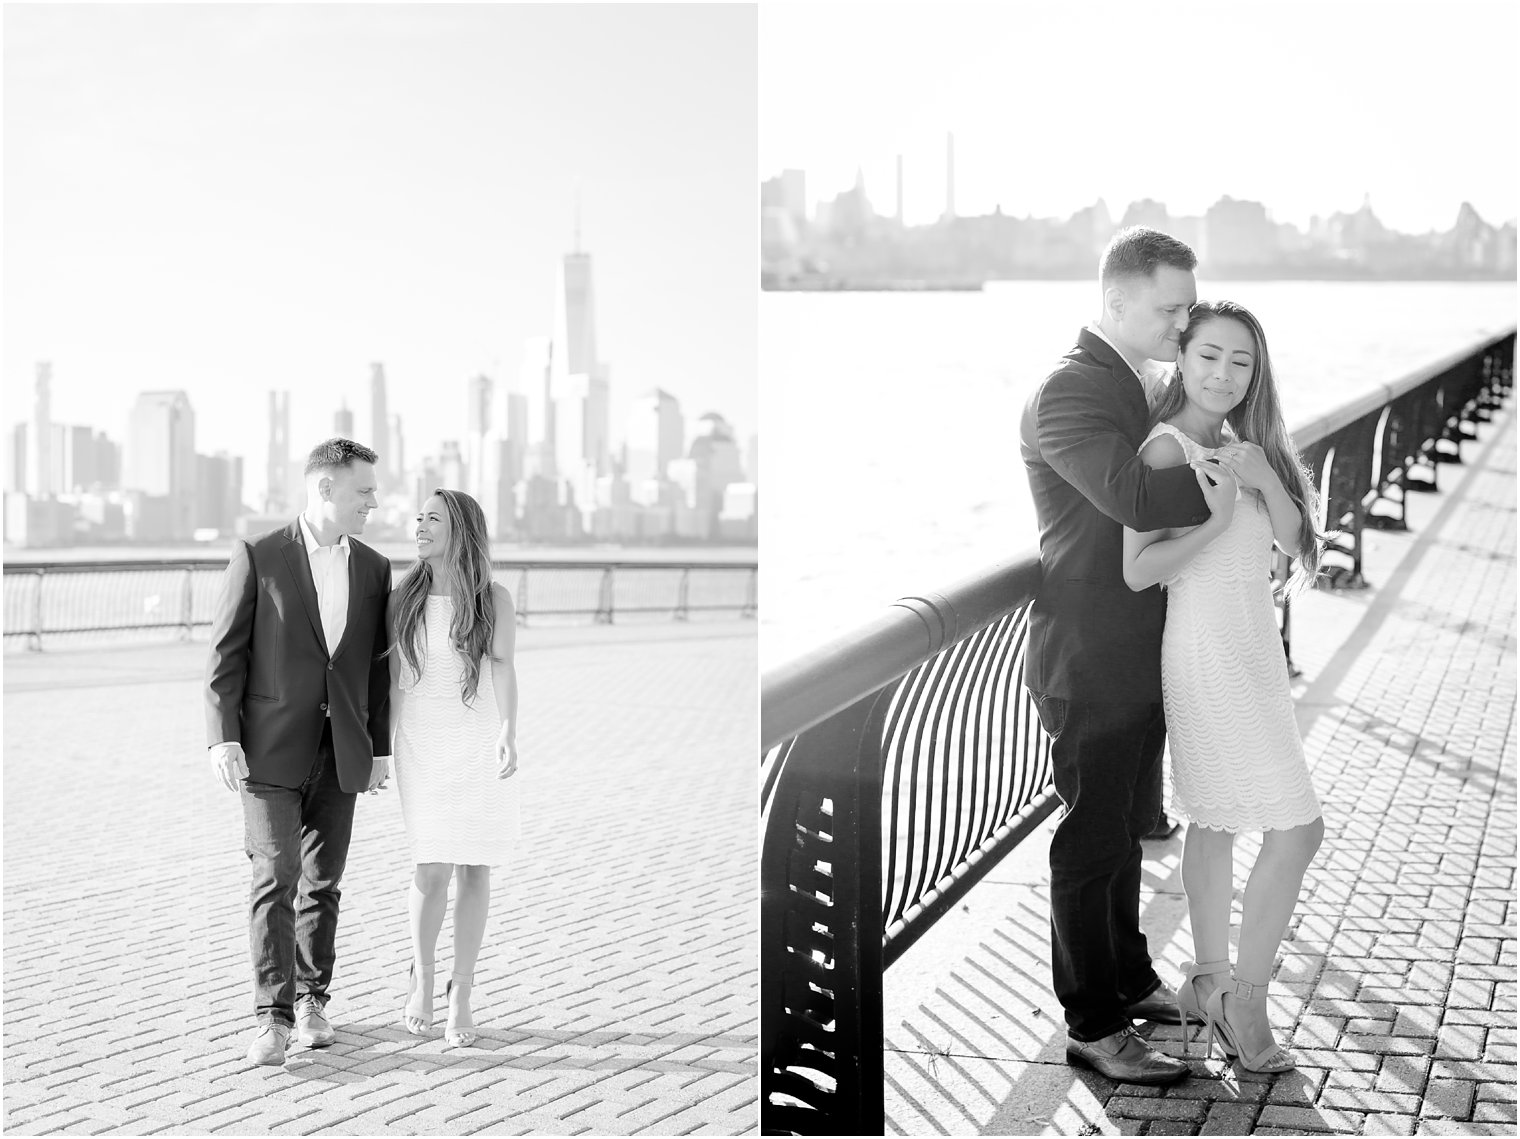 Waterfront engagement session in Hoboken